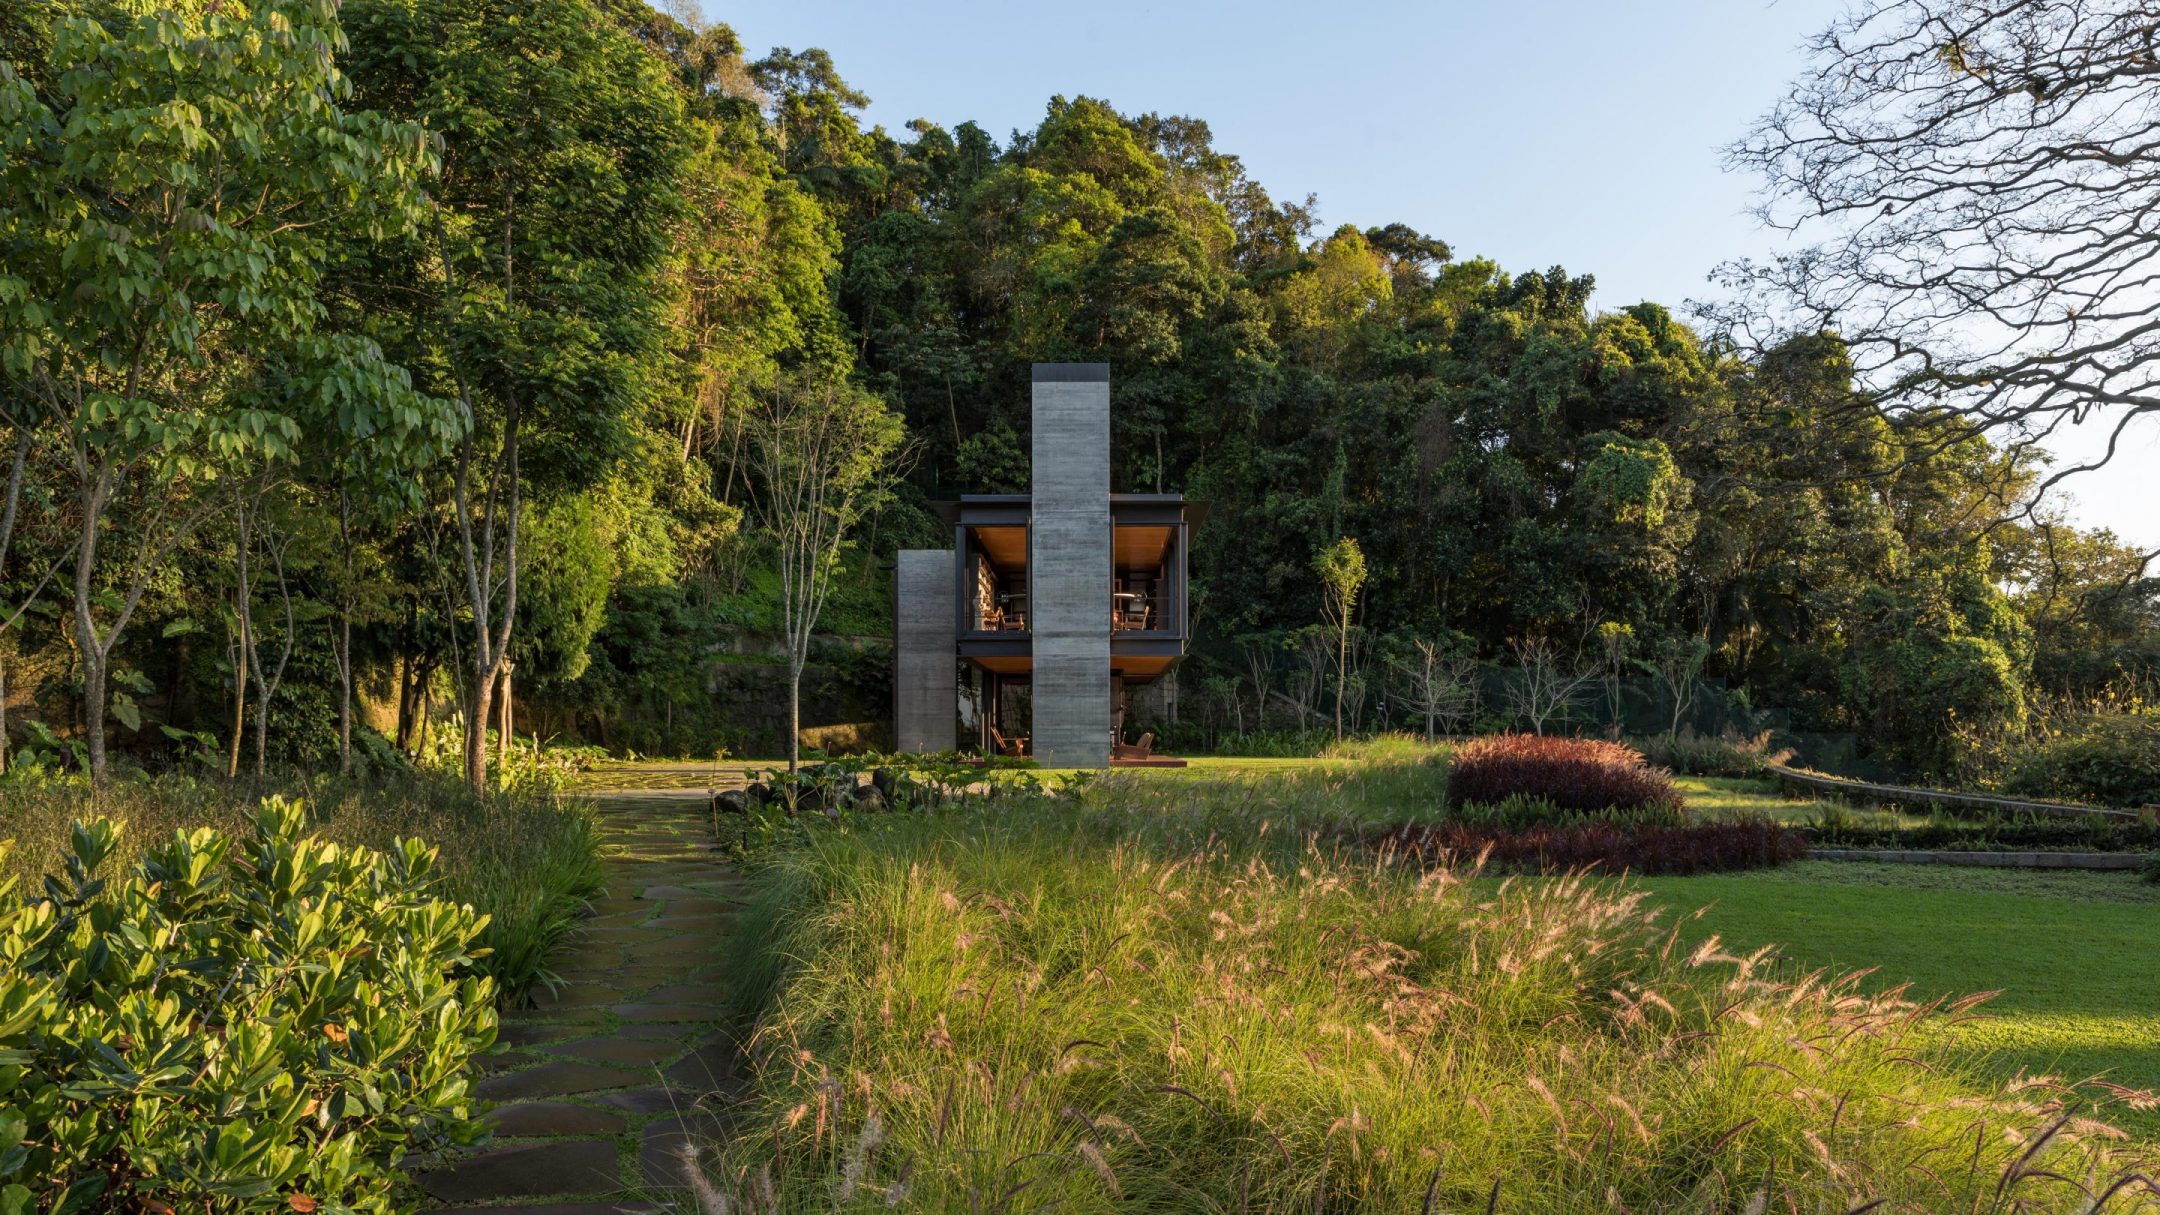 In Rio de Janeiro, Architecture That's in Sync With the Jungle